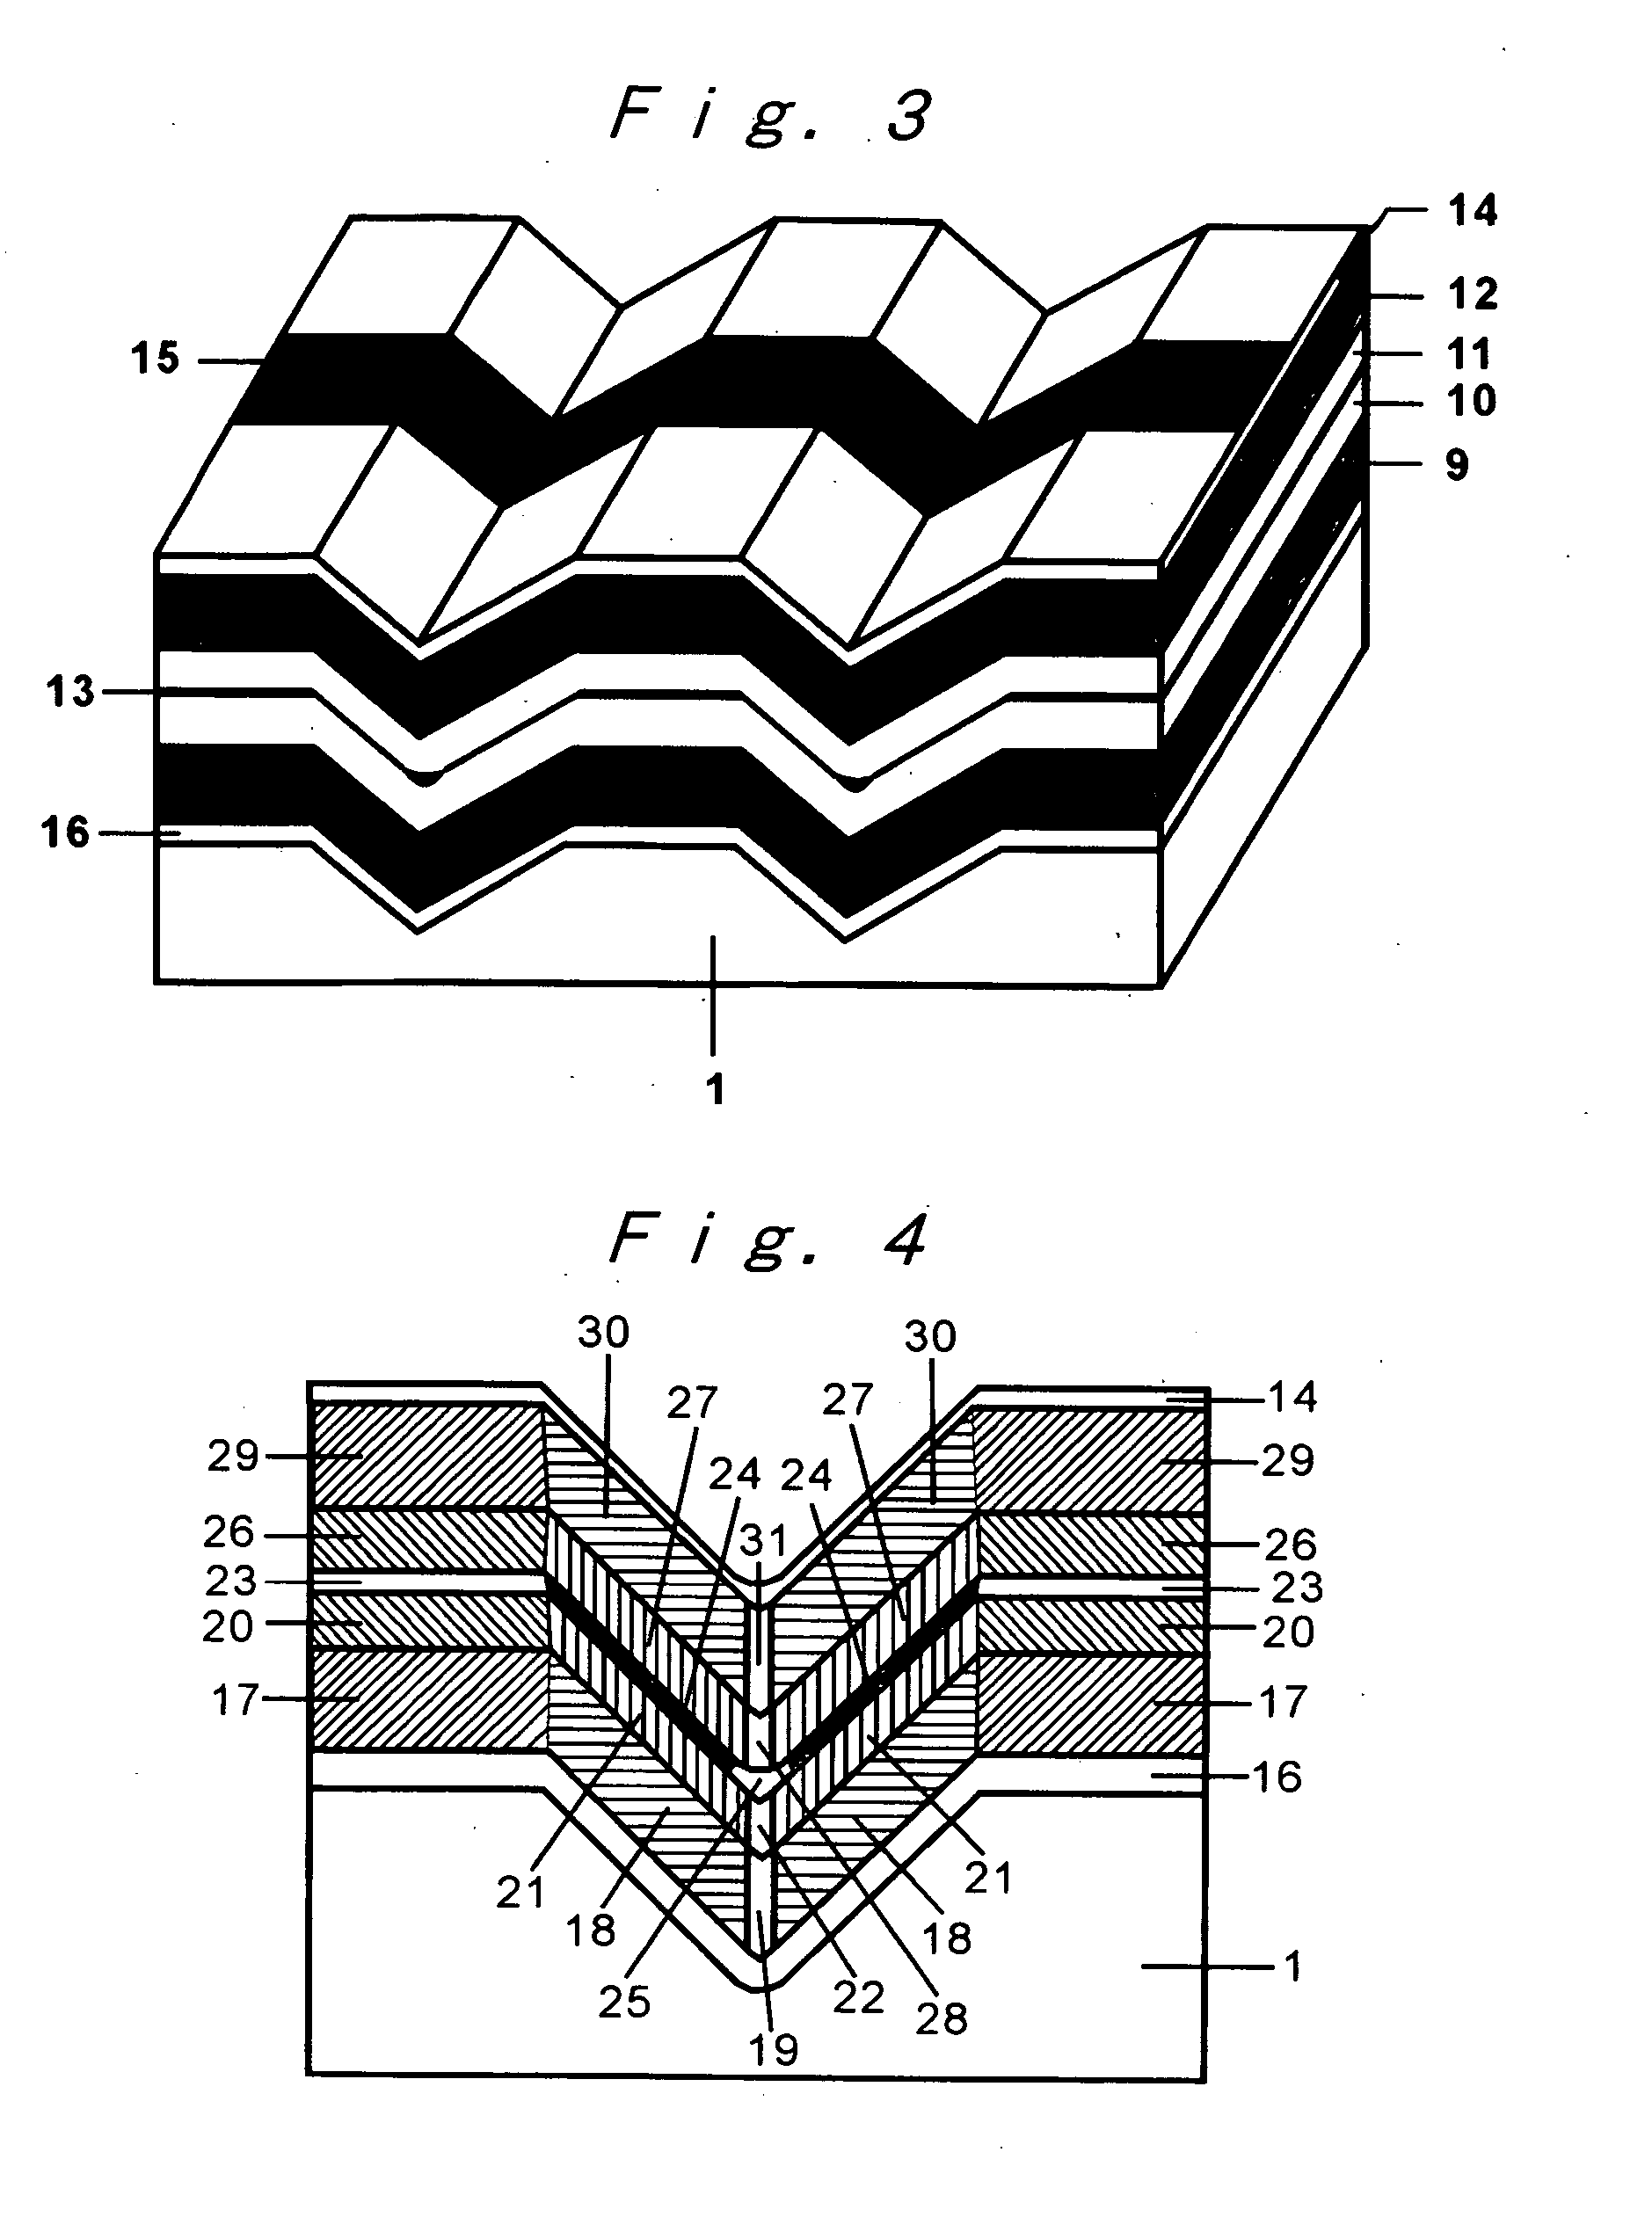 III-V group compound semiconductor light-emitting diode